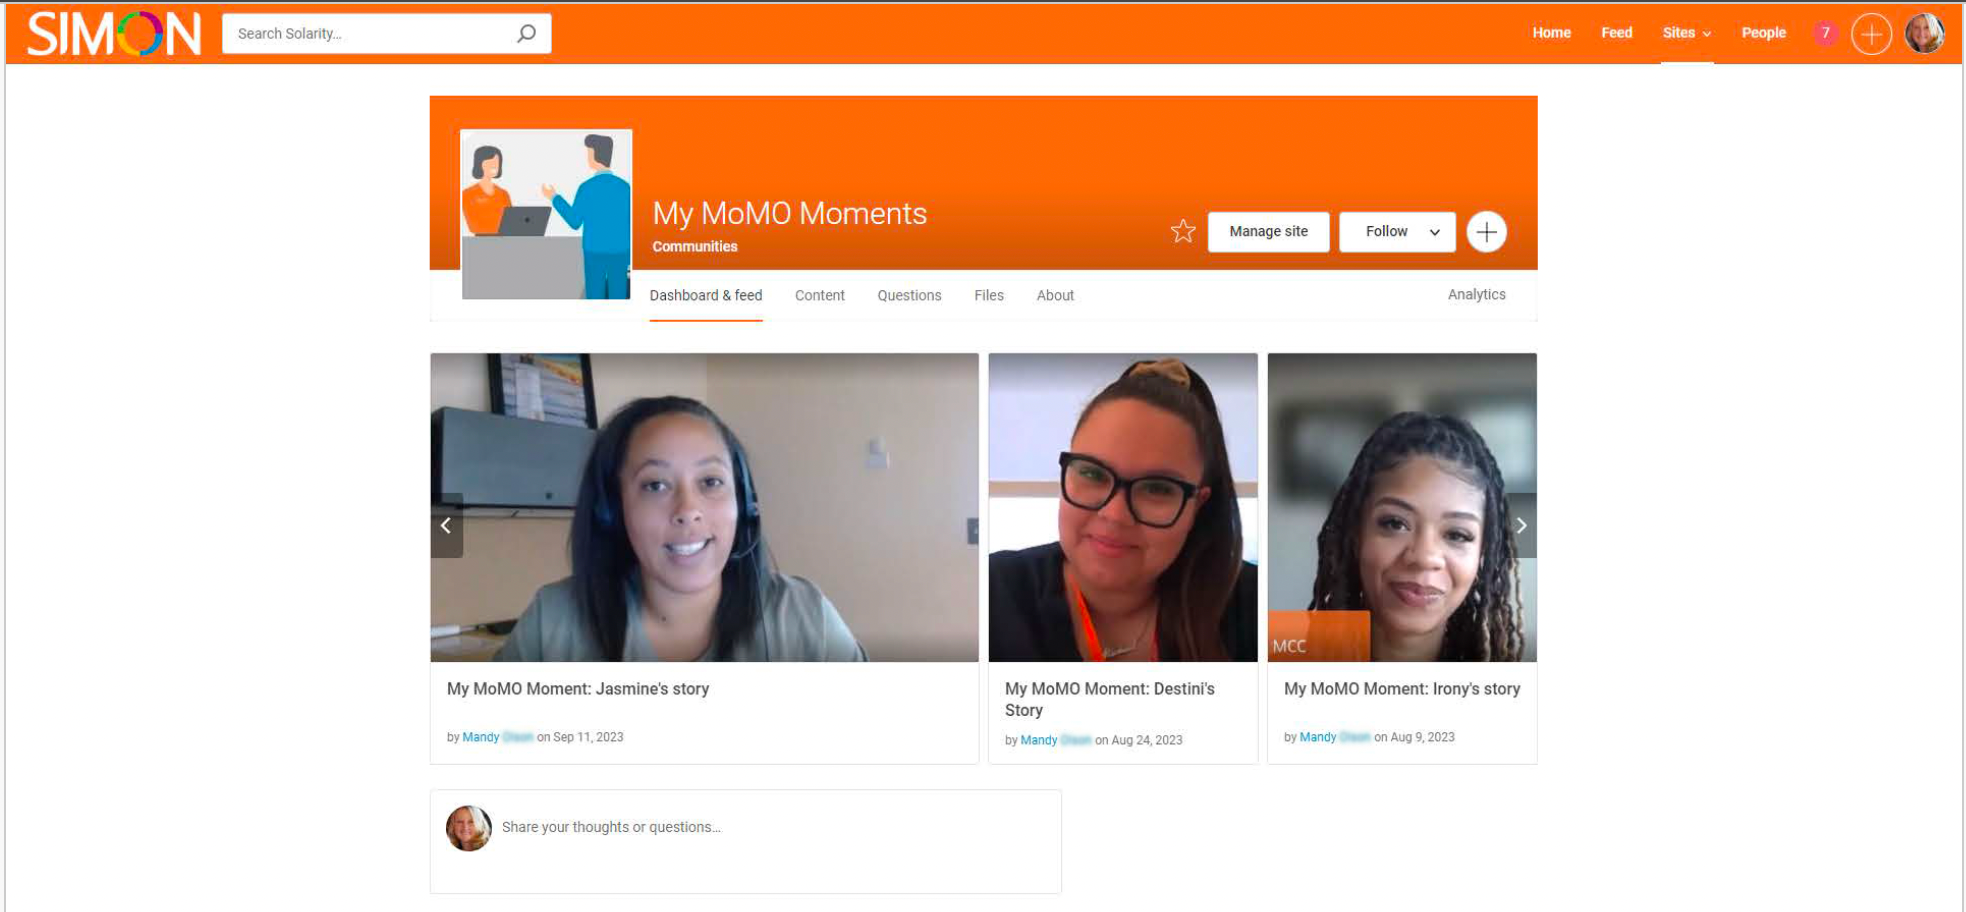 Solarity Credit Union produced the “My MoMO Moments” video series on their intranet, SIMON, to help employees engage more deeply with the company’s four Measures of Member Obsession.